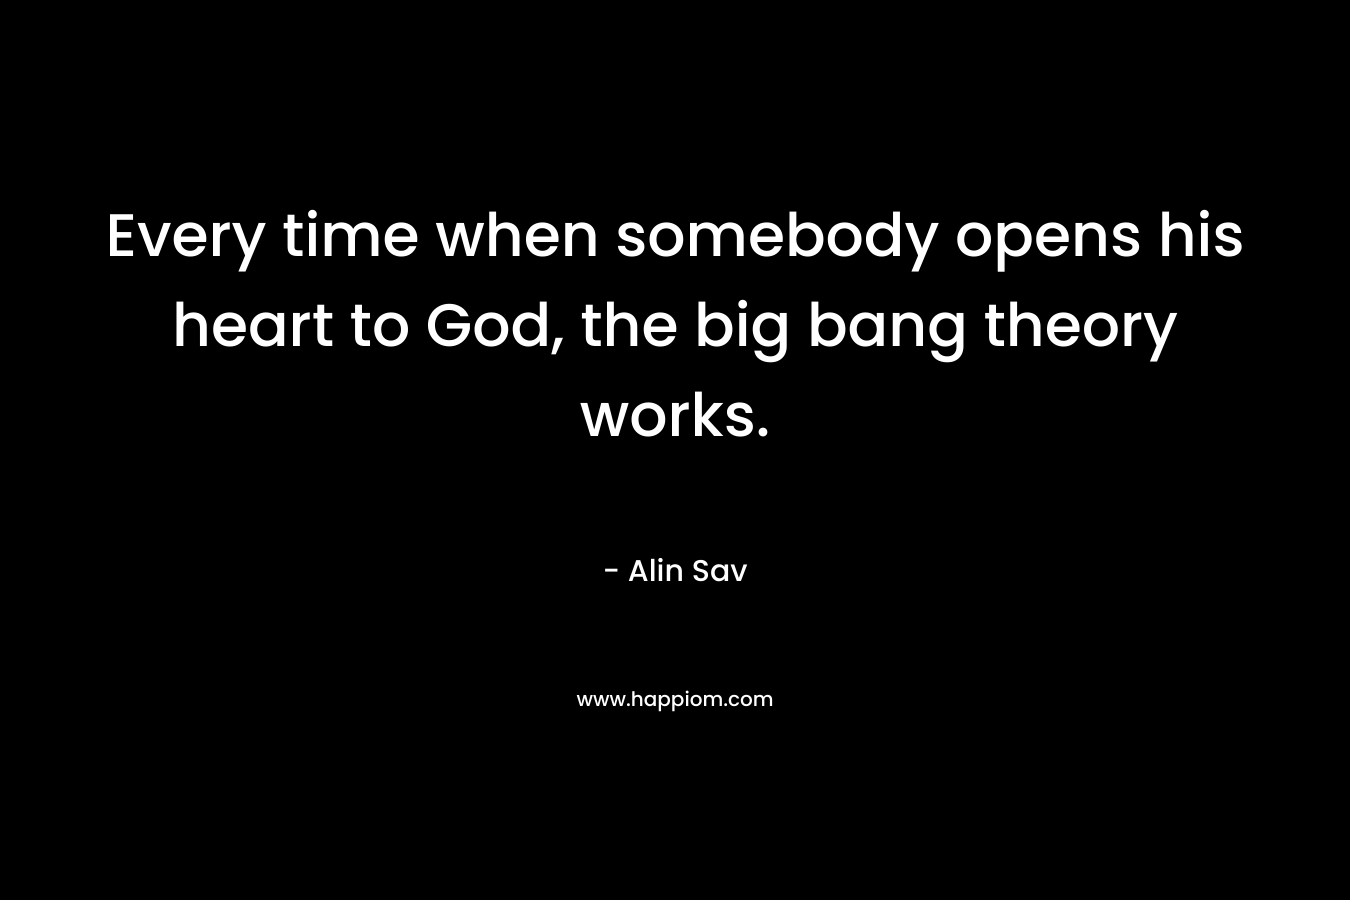 Every time when somebody opens his heart to God, the big bang theory works.